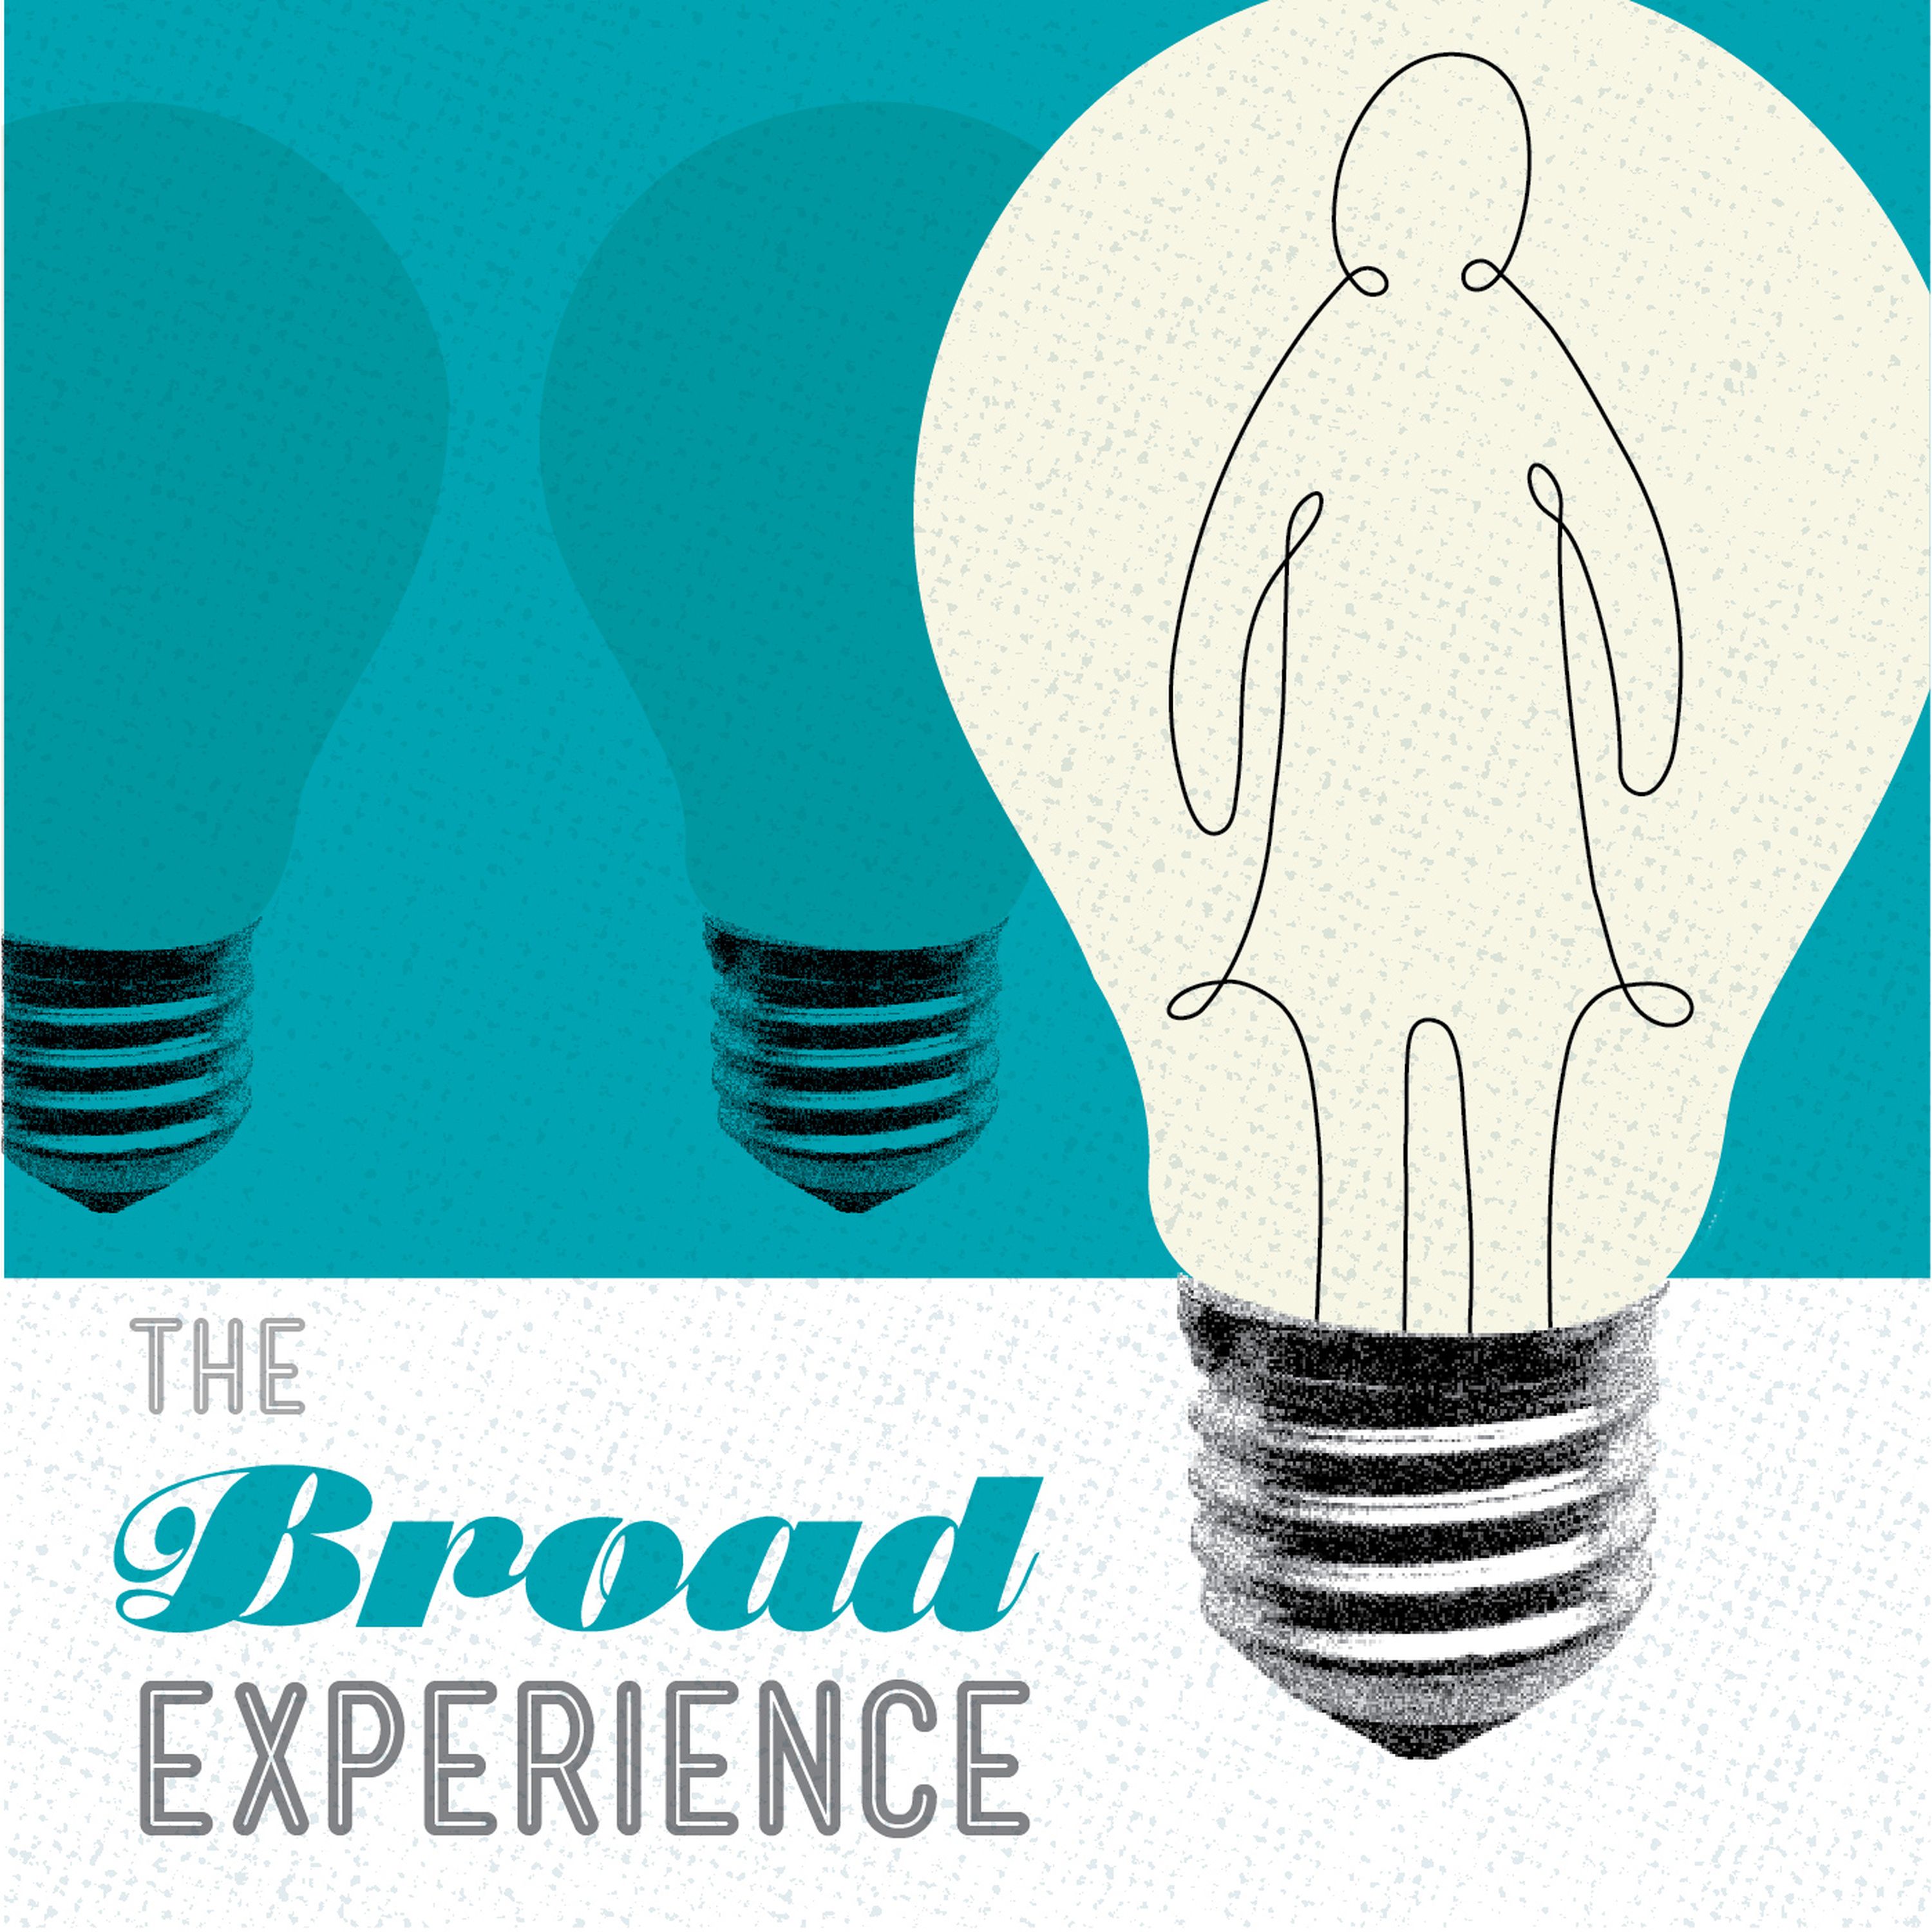 The Broad Experience 66: Men on Women